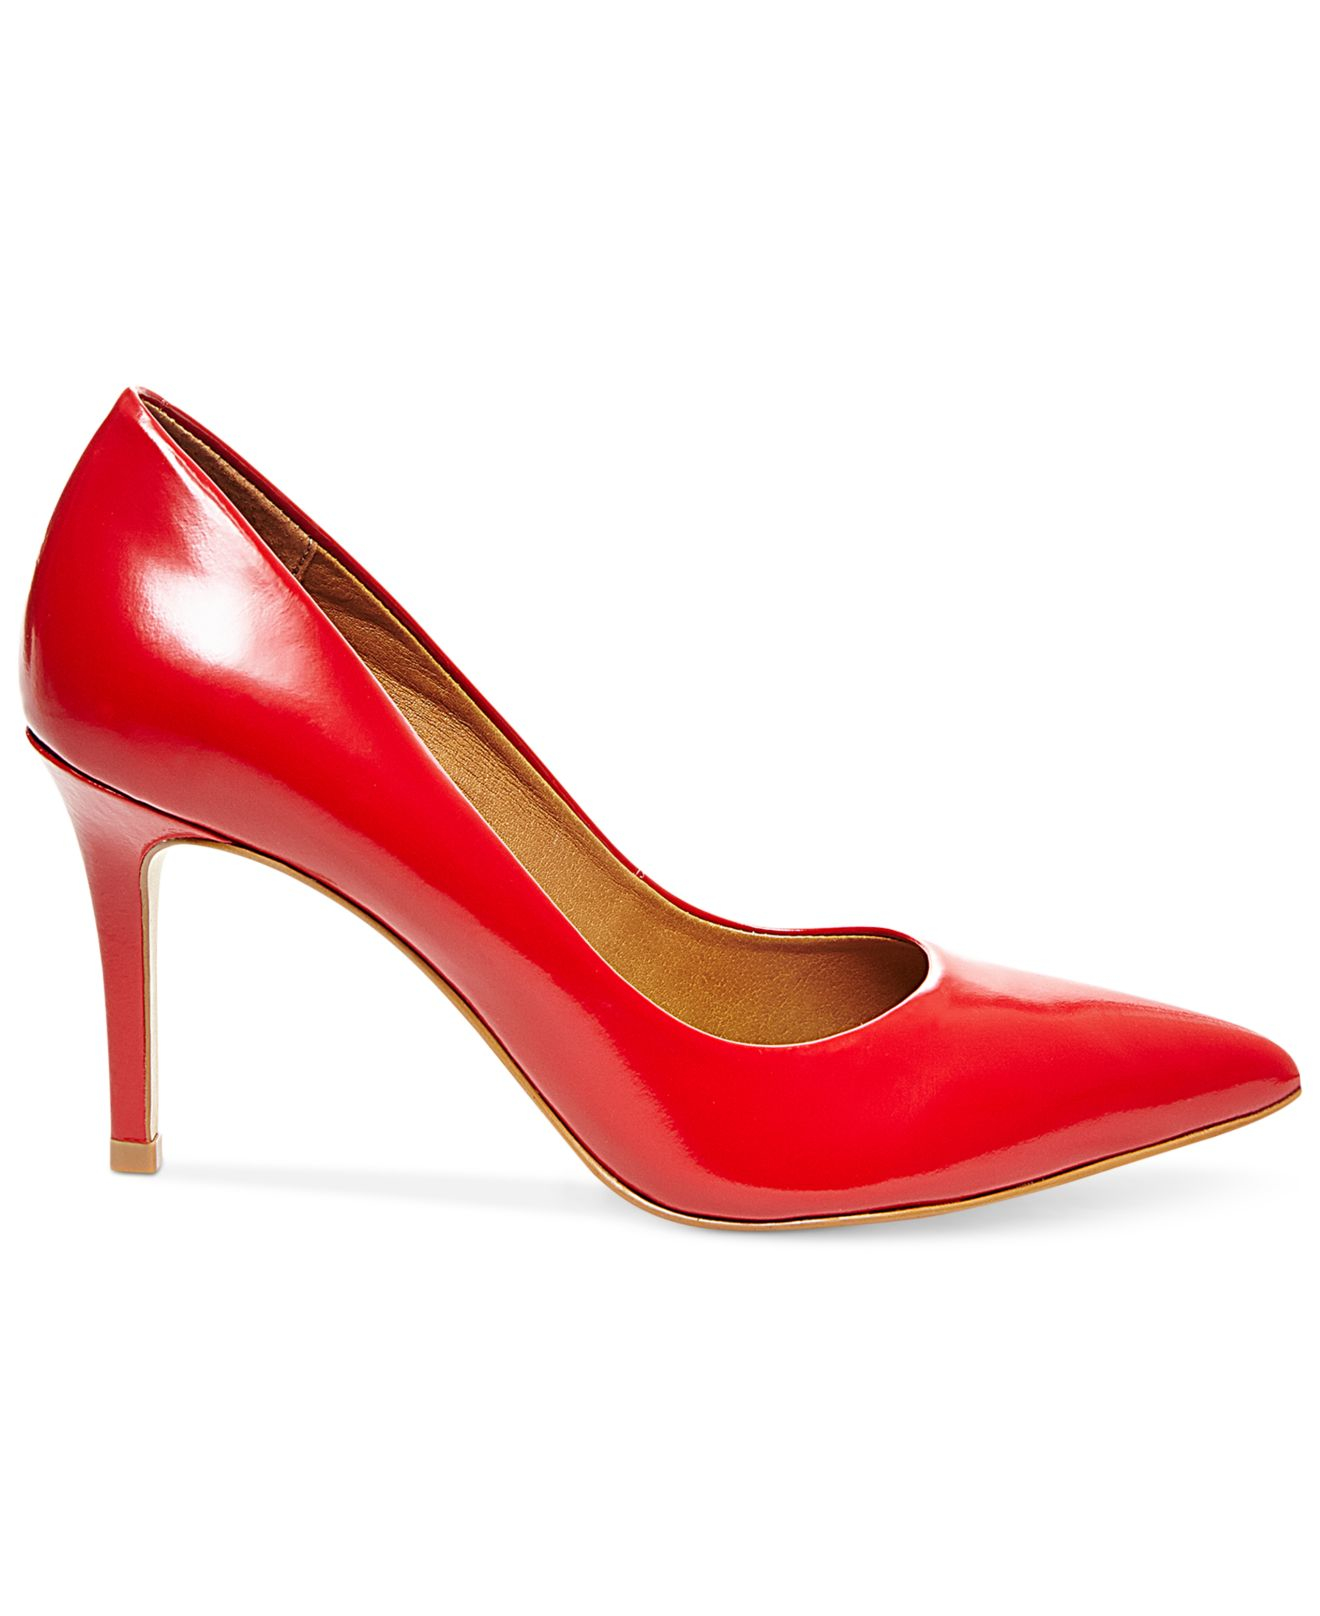 Lyst - Steven By Steve Madden Sheila Pointed Toe Pumps in Red